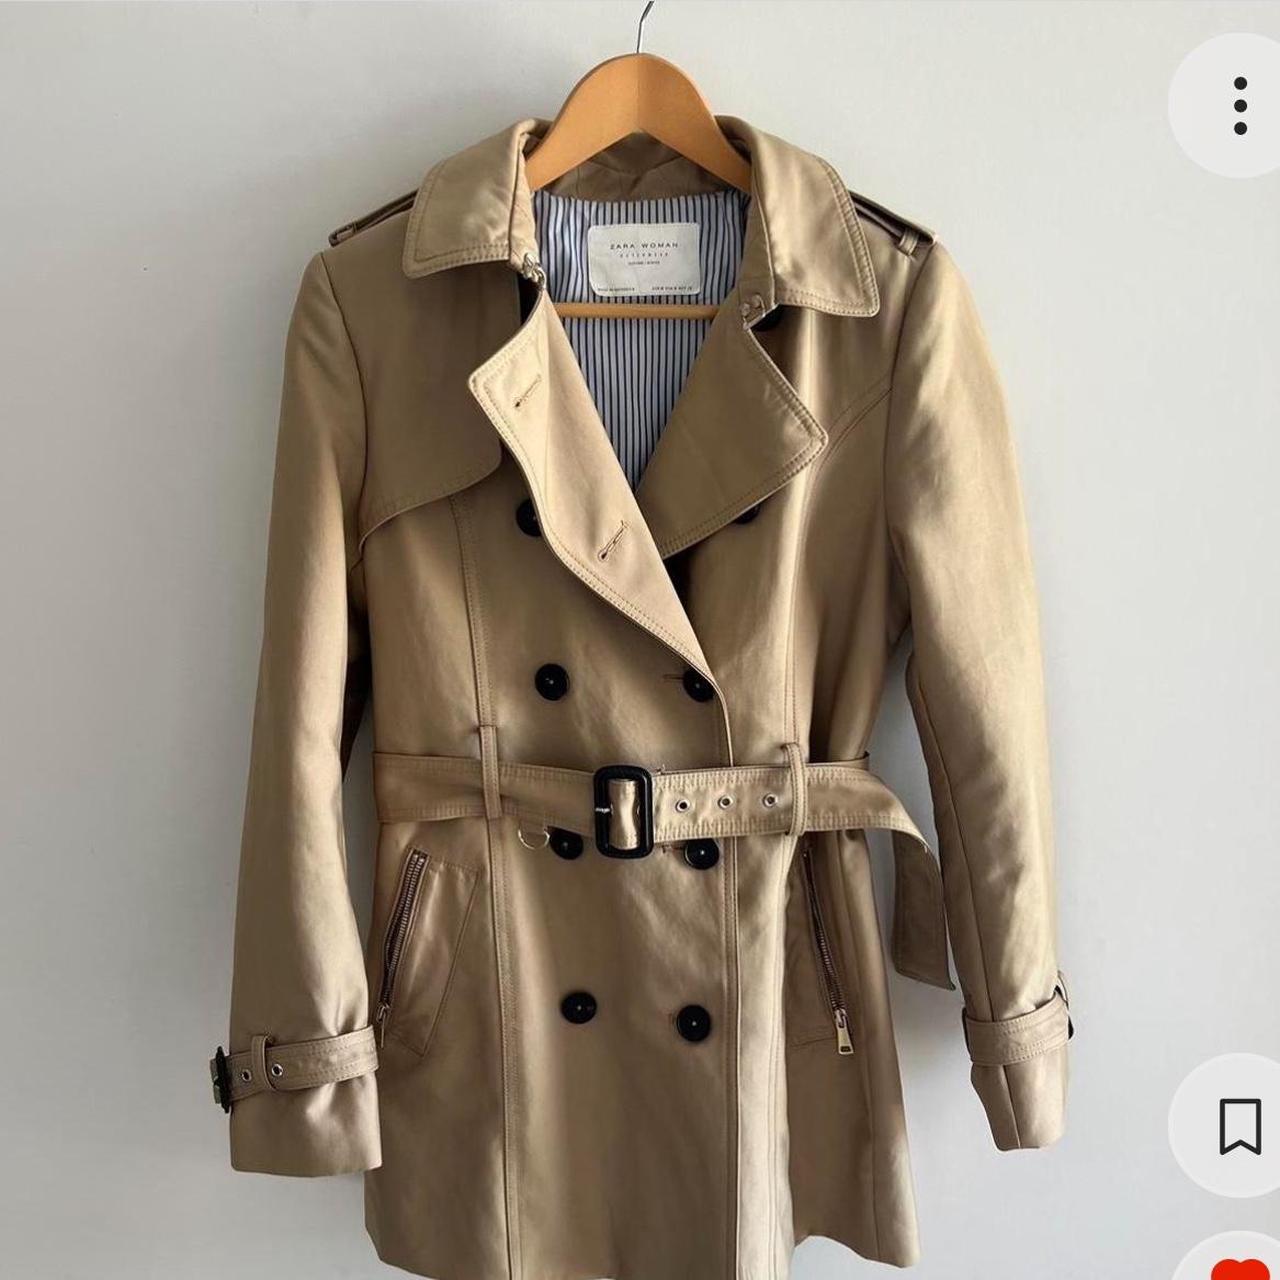 Zara trench coat Size M (10) Tan colour Absolutely... - Depop